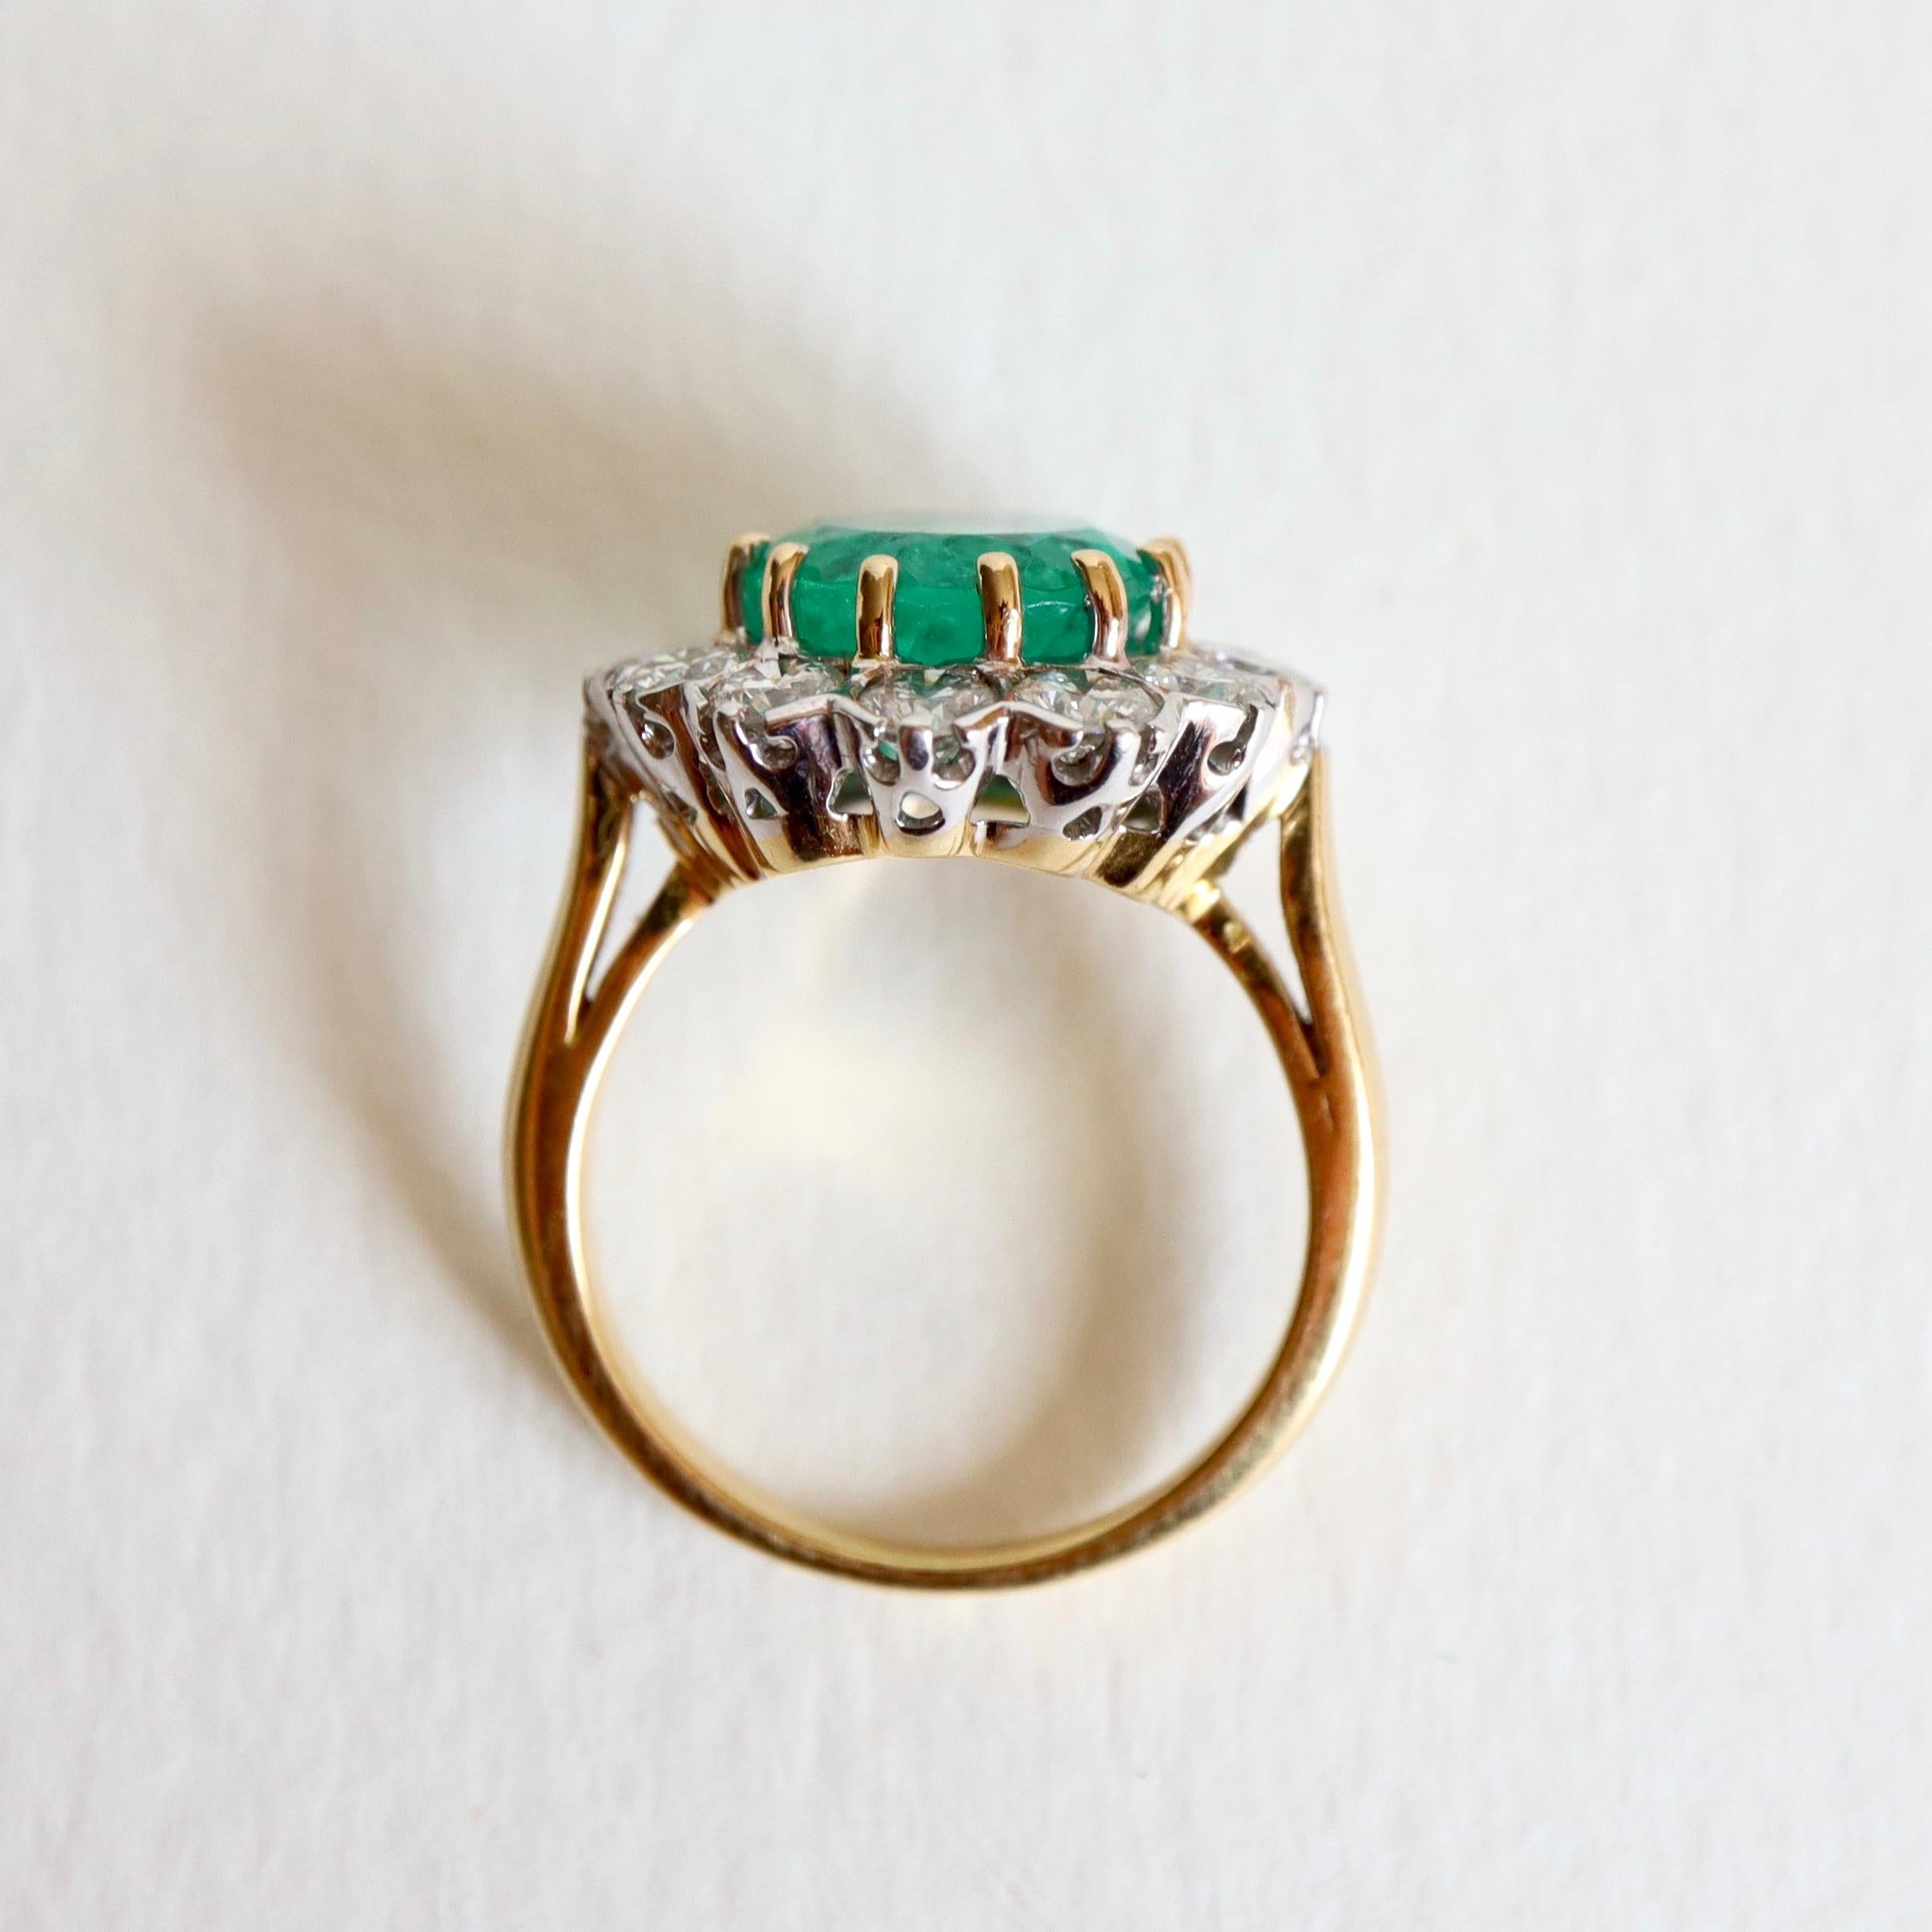 Pompadour Model Ring in 18 carat yellow Gold setting in its Center a large Oval cut Emerald set with Claws weighing 4.53 Carats surrounded by 12 Diamonds of approximately 0.15 Carat each mounted on 18 Carat white Gold Chatons for a total Weight